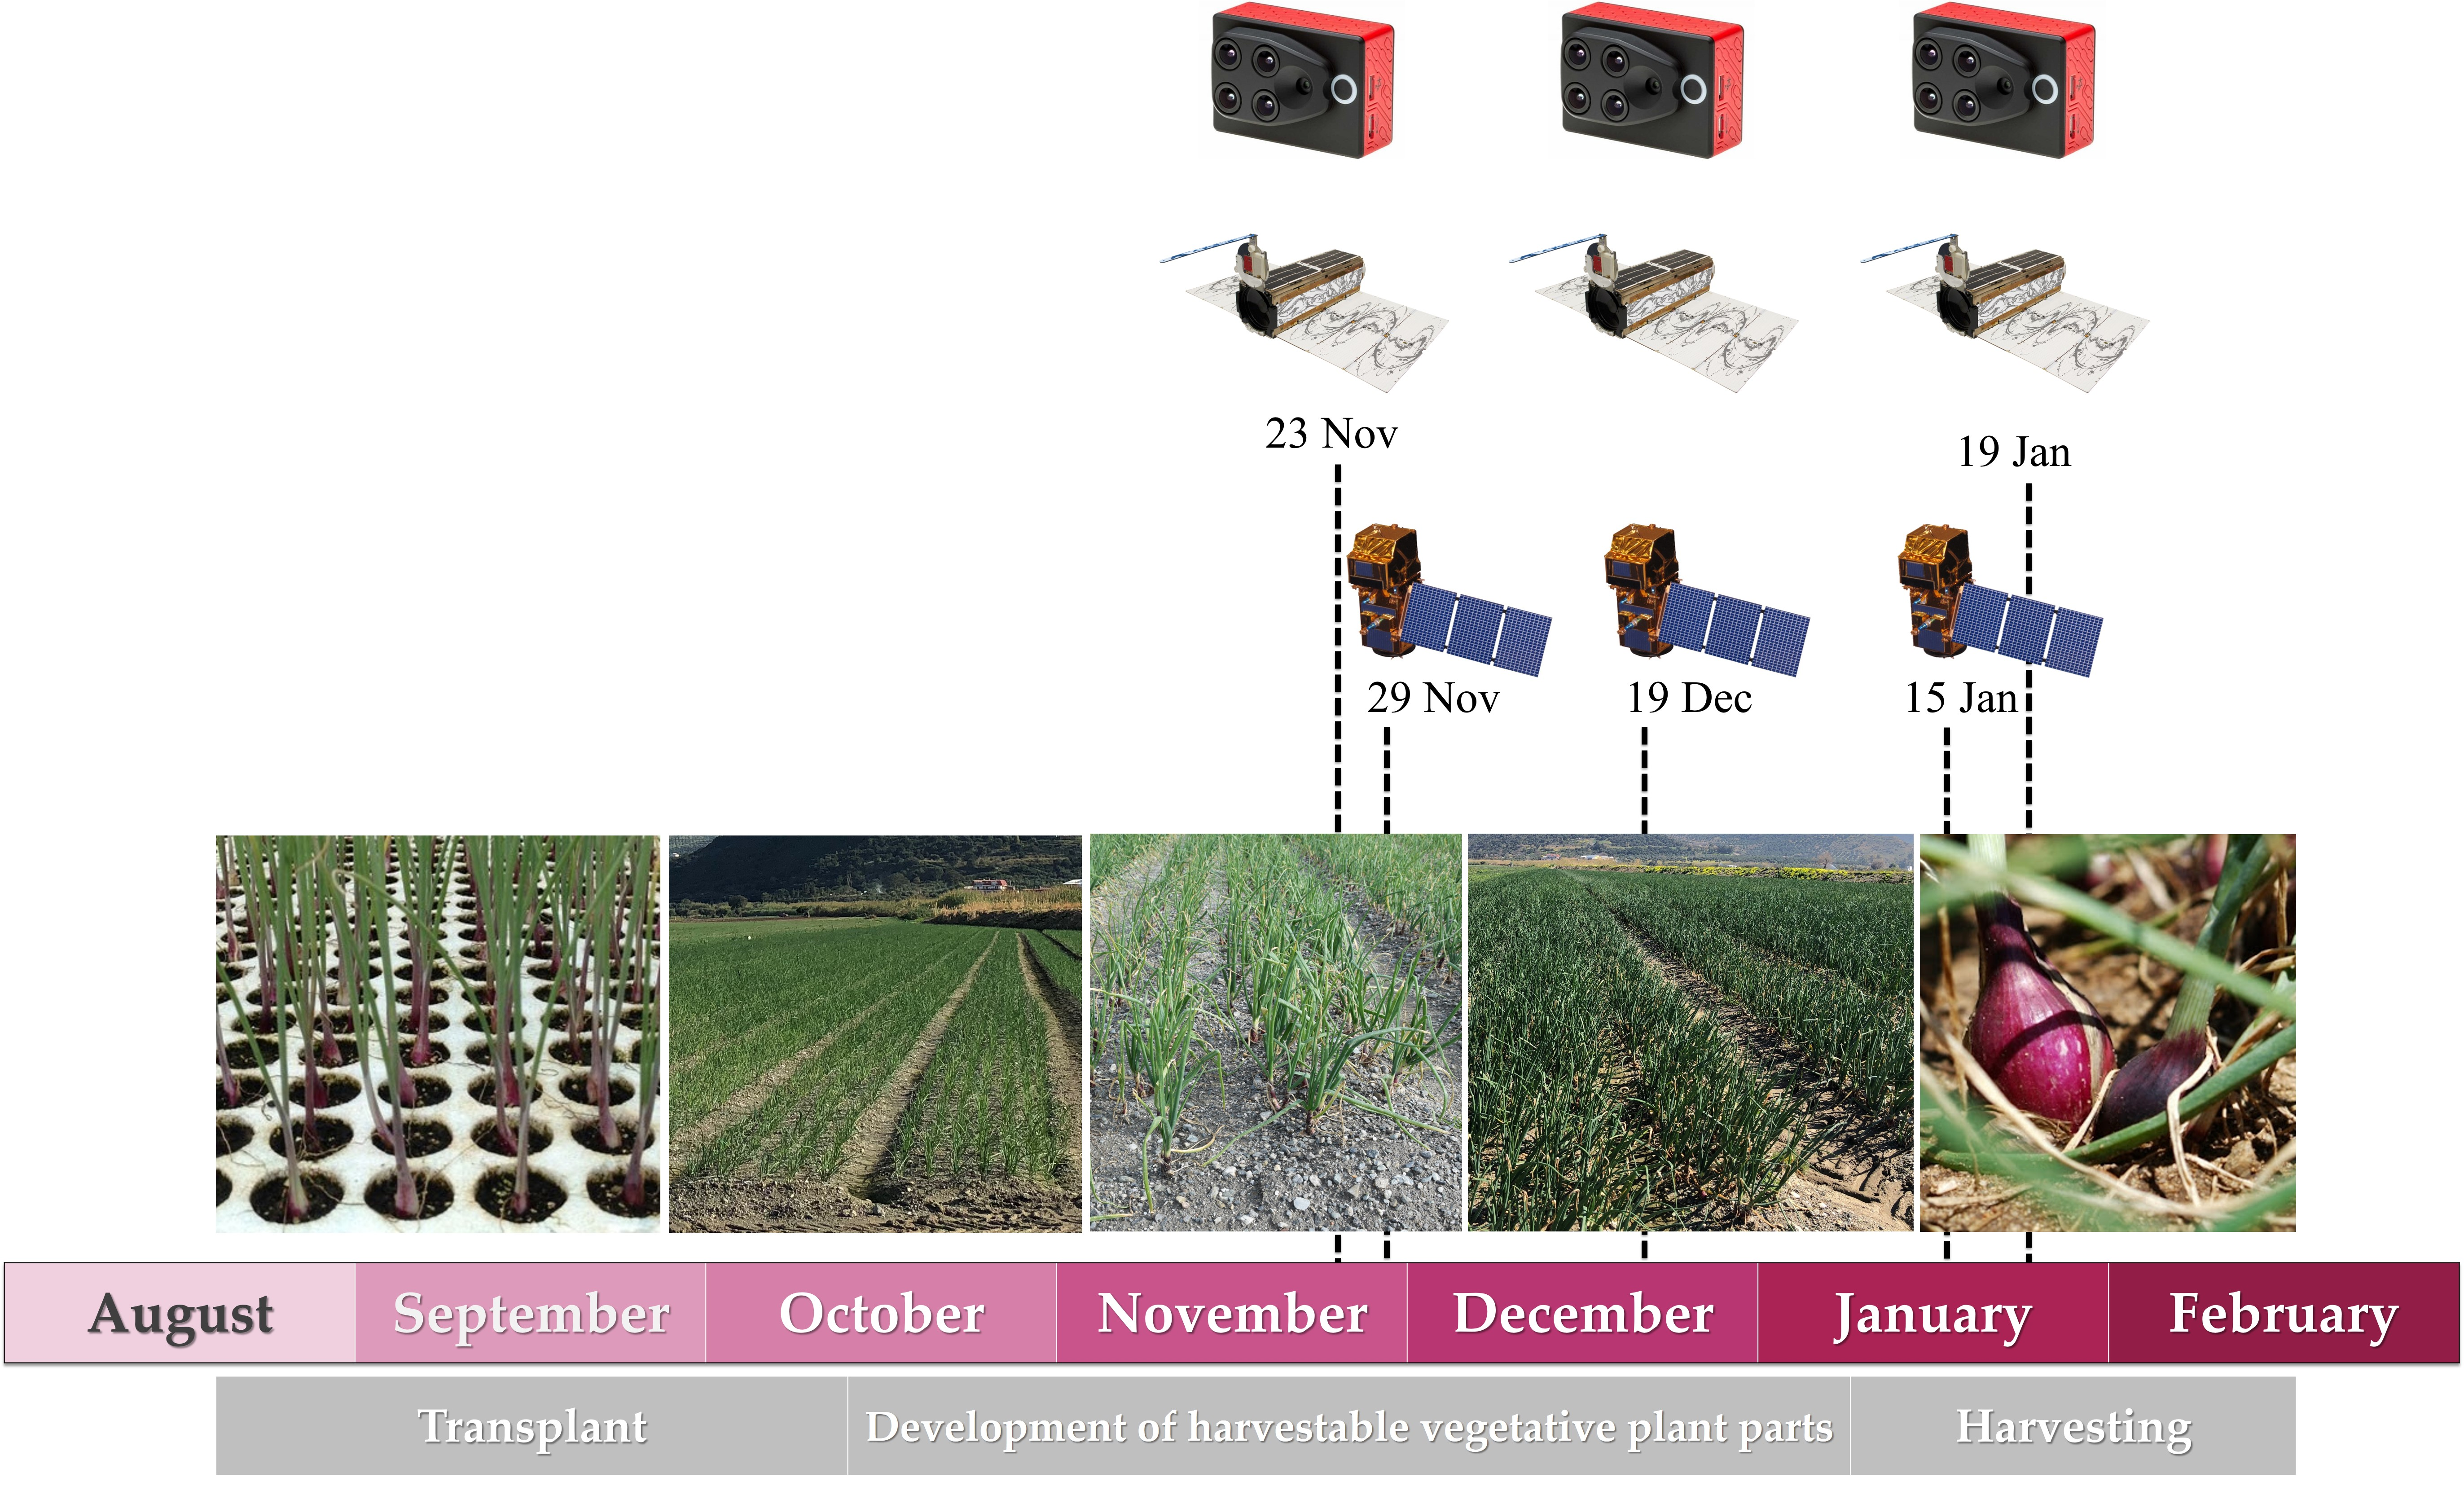 Remote Sensing Free Full Text A Comparison Of Uav And Satellites Multispectral Imagery In Monitoring Onion Crop An Application In The Cipolla Rossa Di Tropea Italy Html